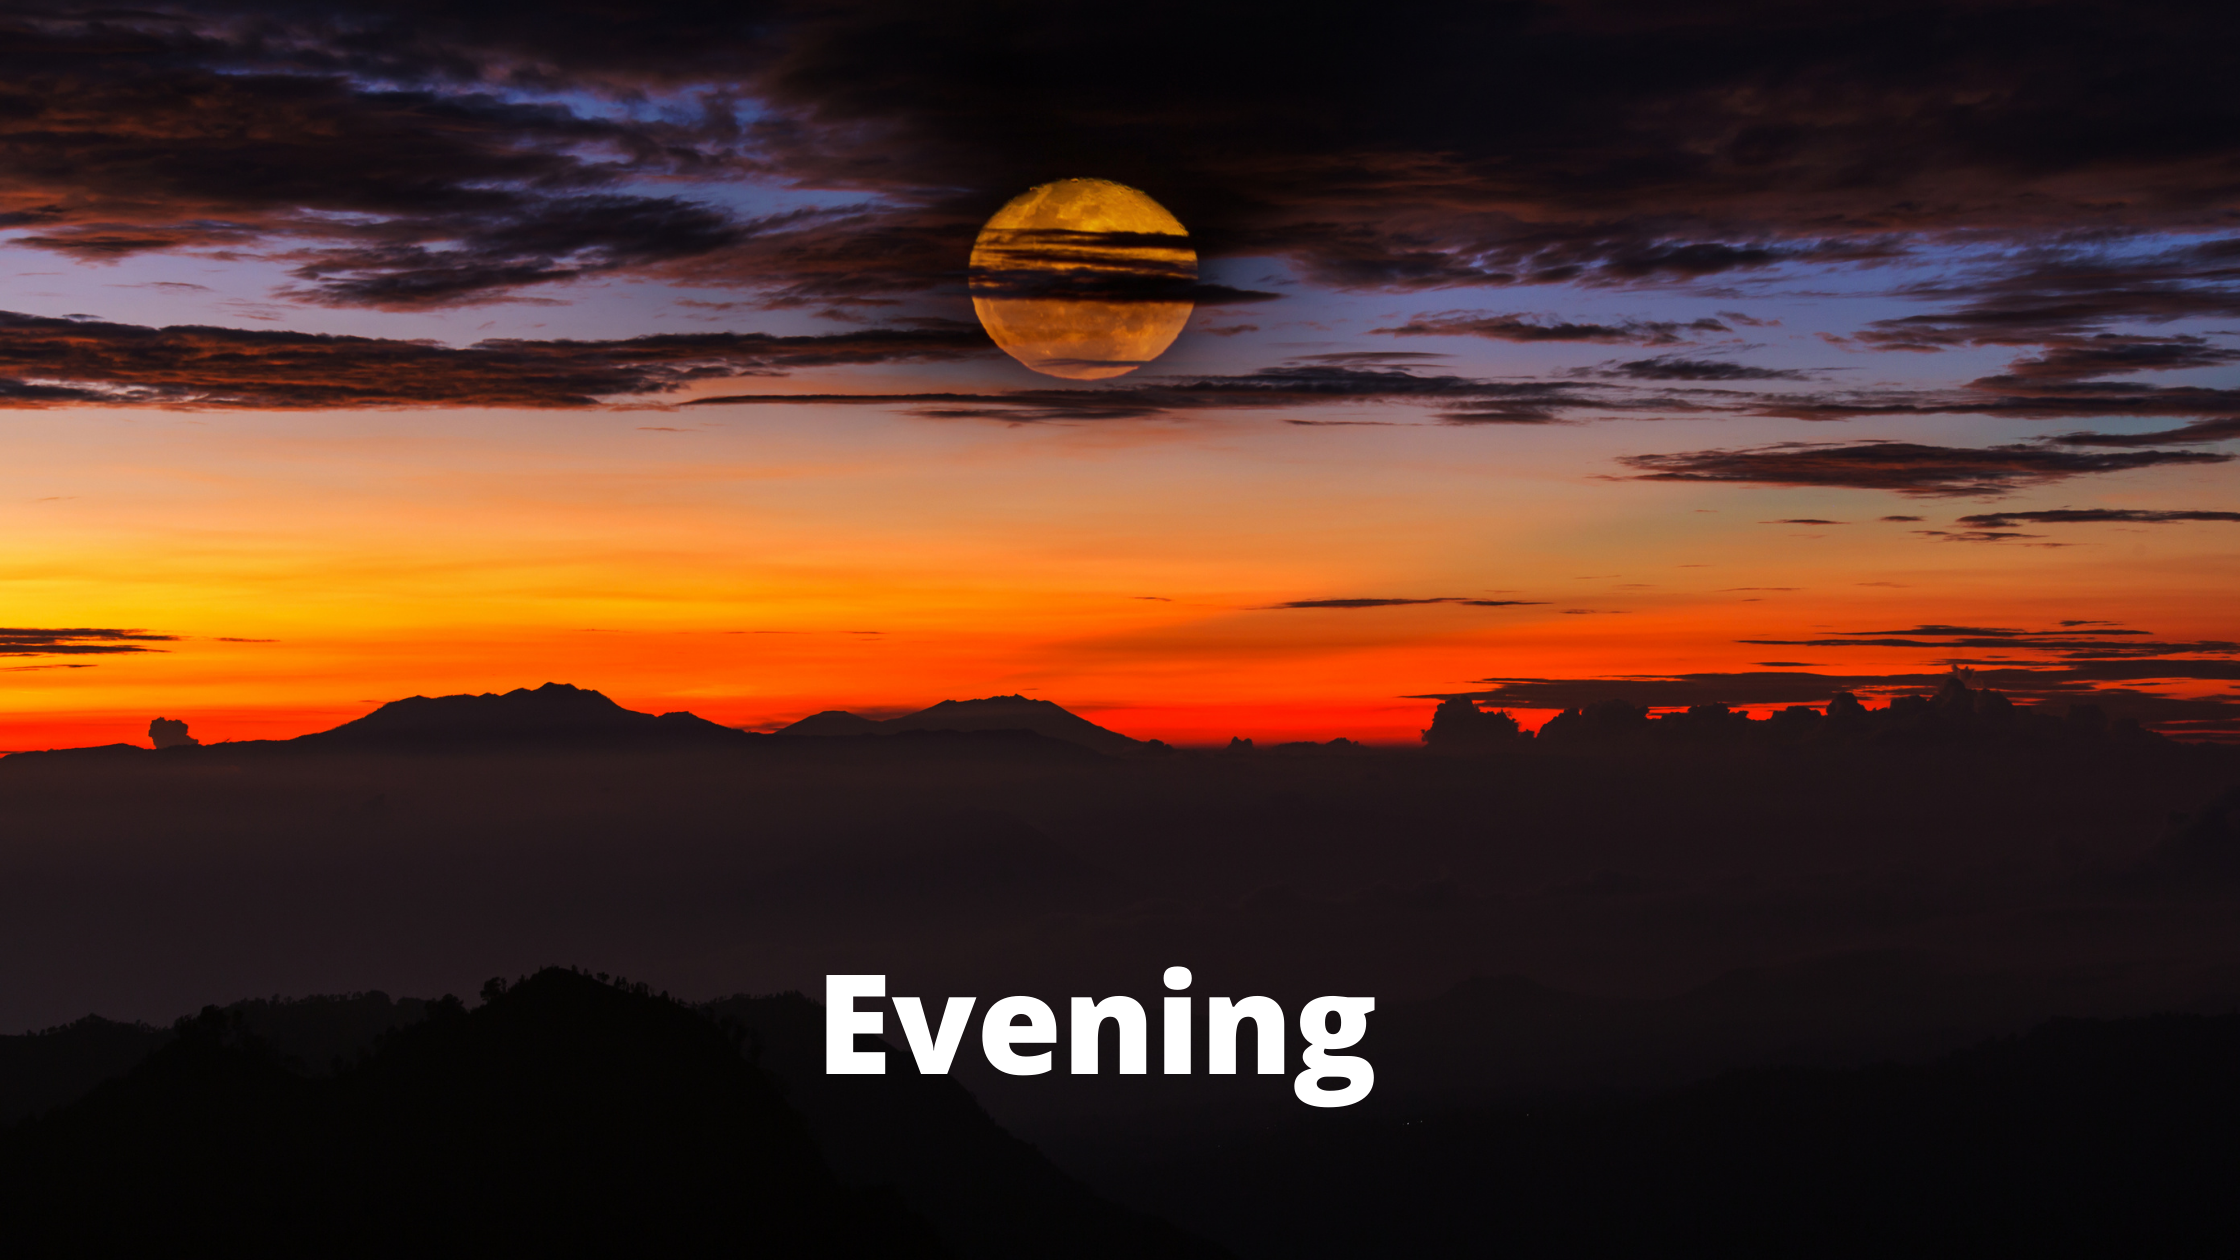 It was time for evening. Evening time. Evening Starter. Relaxing Evening. On Evening or in Evening.